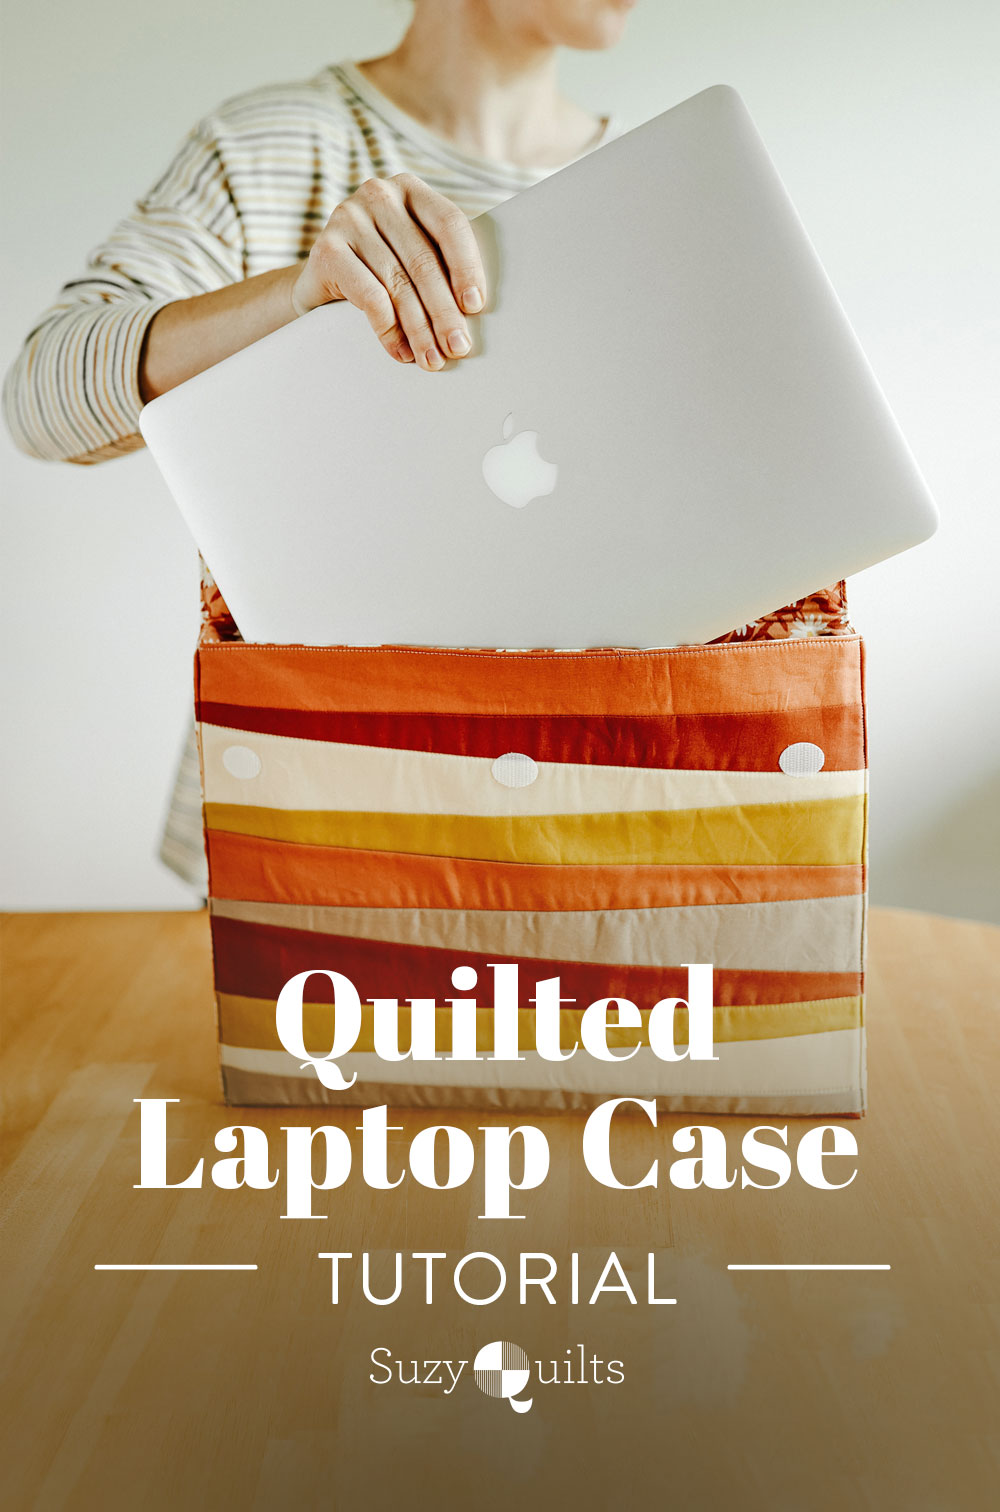 Learn to sew a beginner-friendly quilted laptop case in this tutorial featuring the Shine quilt block by Suzy Quilts. suzyquilts.com #sewingdiy #quilting